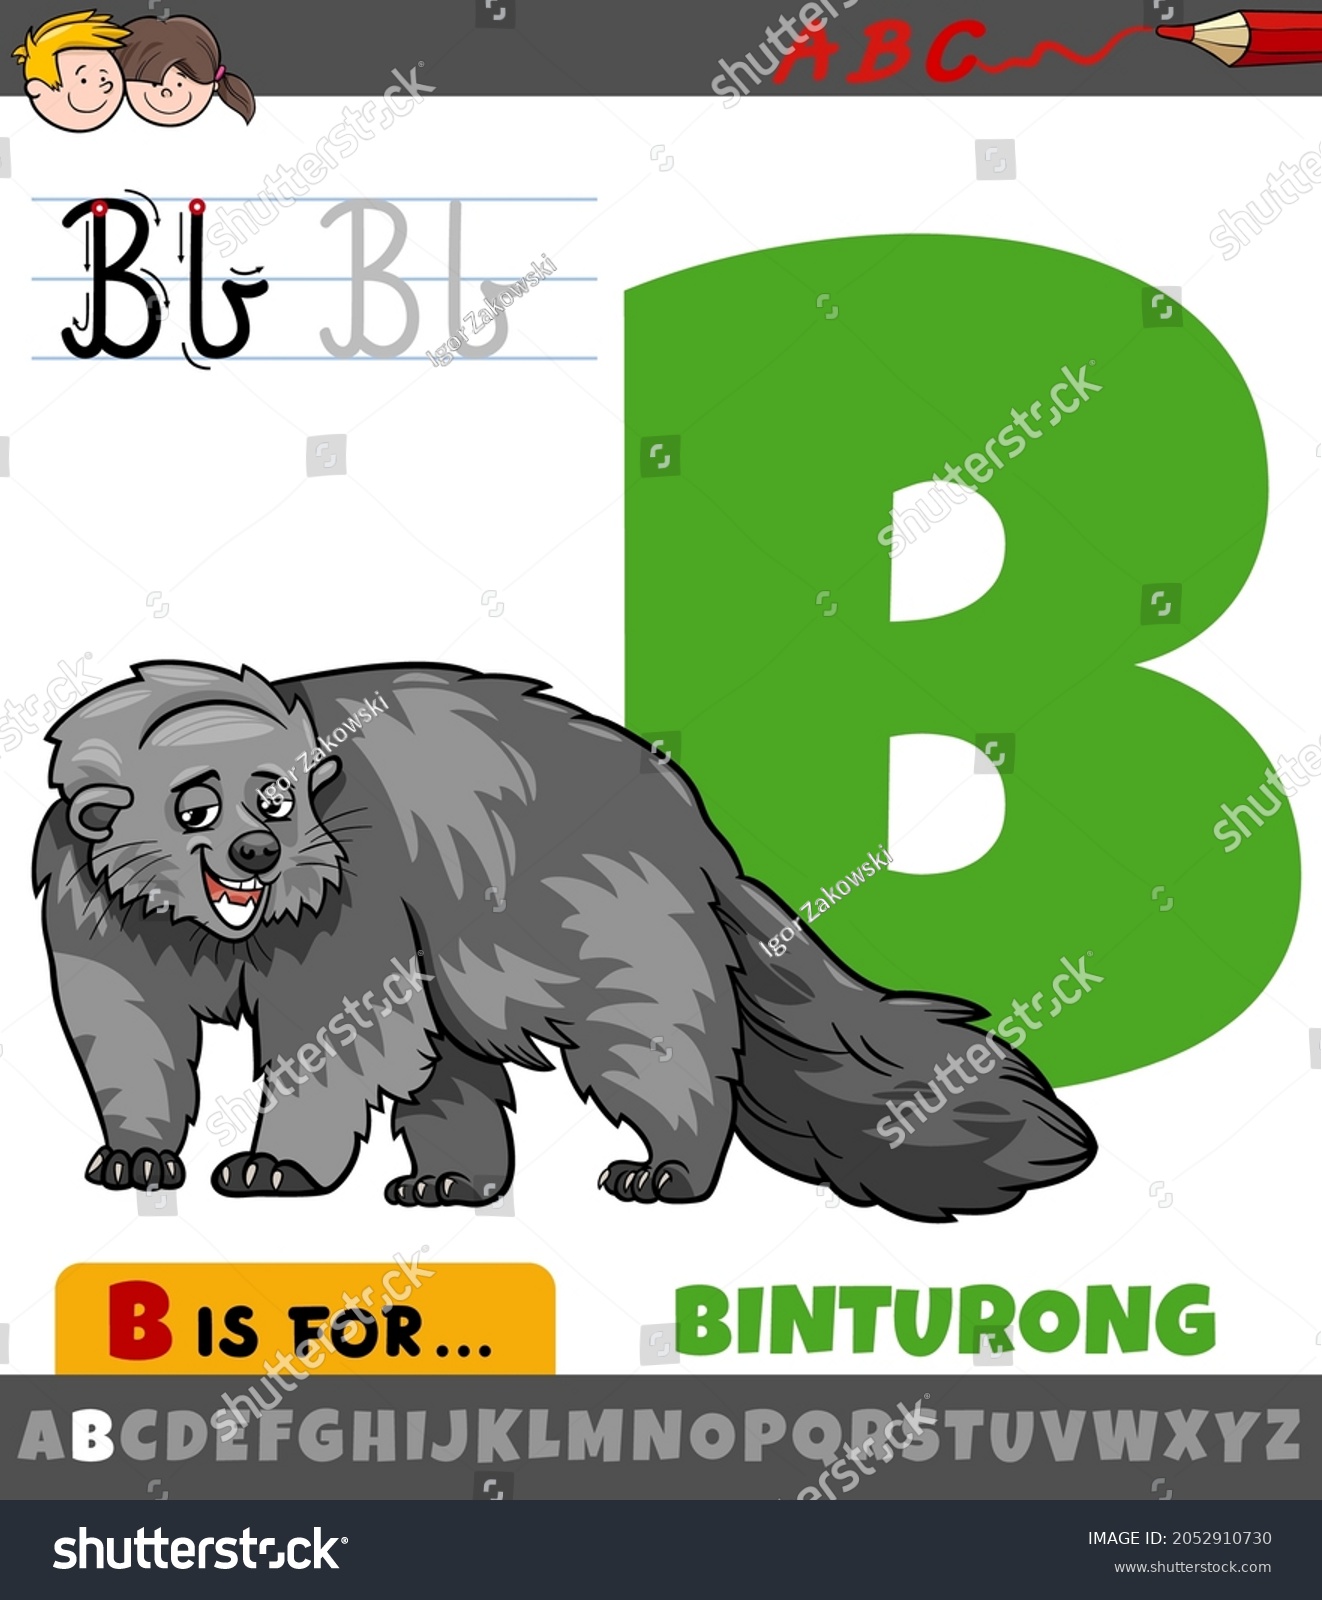 SVG of Educational cartoon illustration of letter B from alphabet with binturong animal character svg